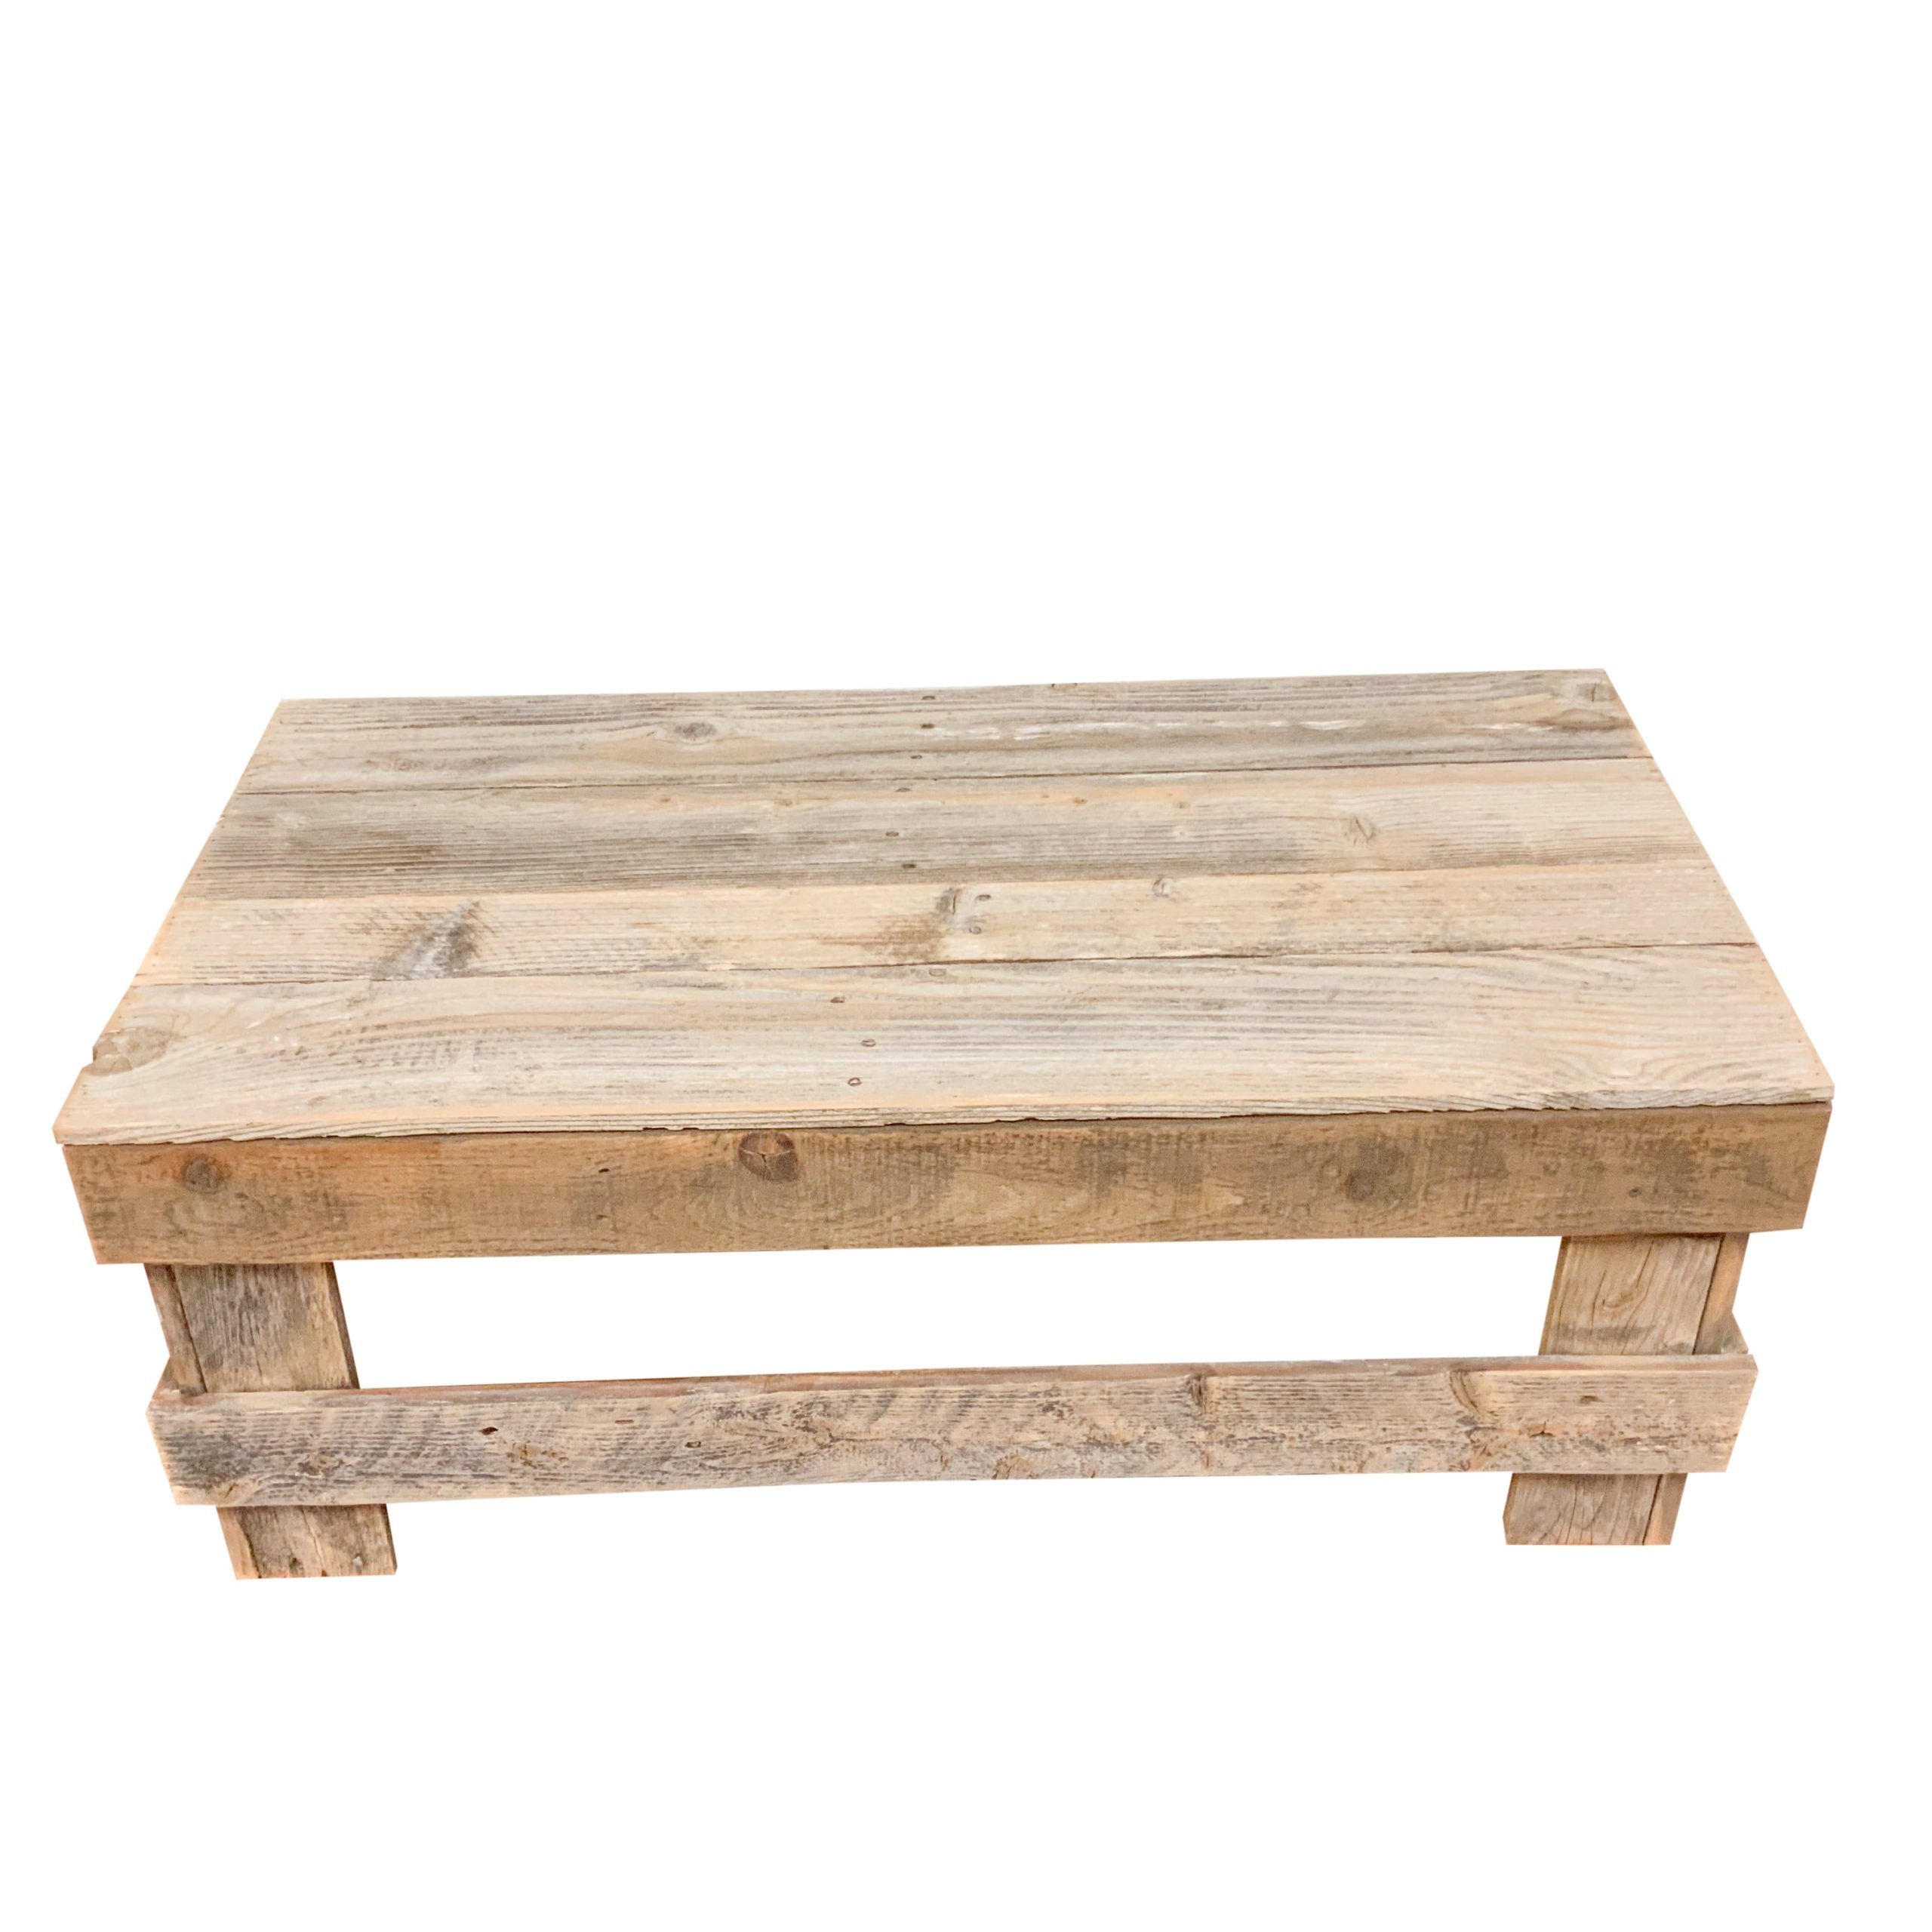 Woven Paths Reclaimed Wood Coffee Table, Natural – Walmart With Regard To Woven Paths Coffee Tables (View 12 of 15)